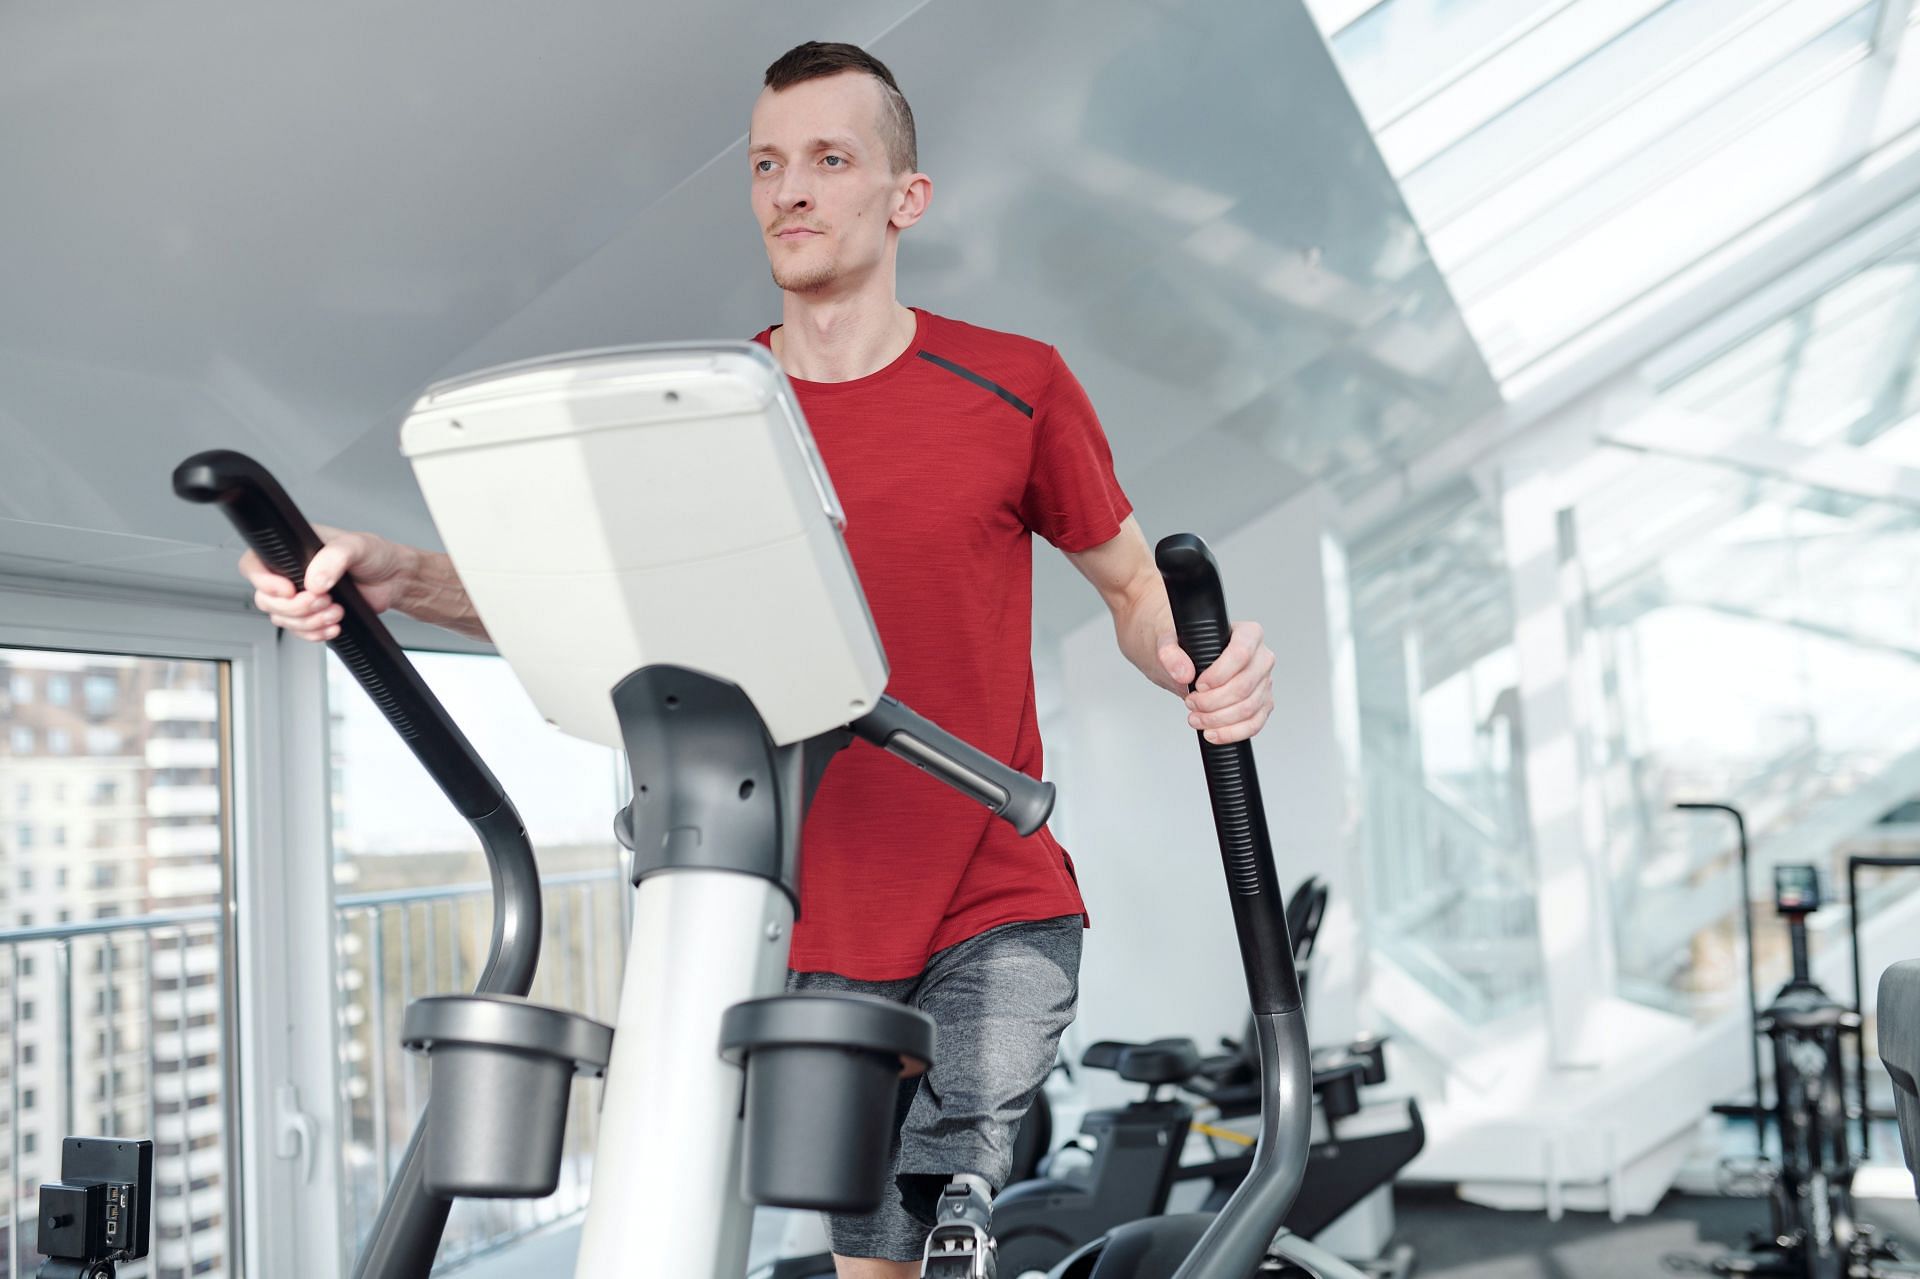 Optimal treadmill workout will have varying pace and incline. (Image via Pexels/Shotpot)